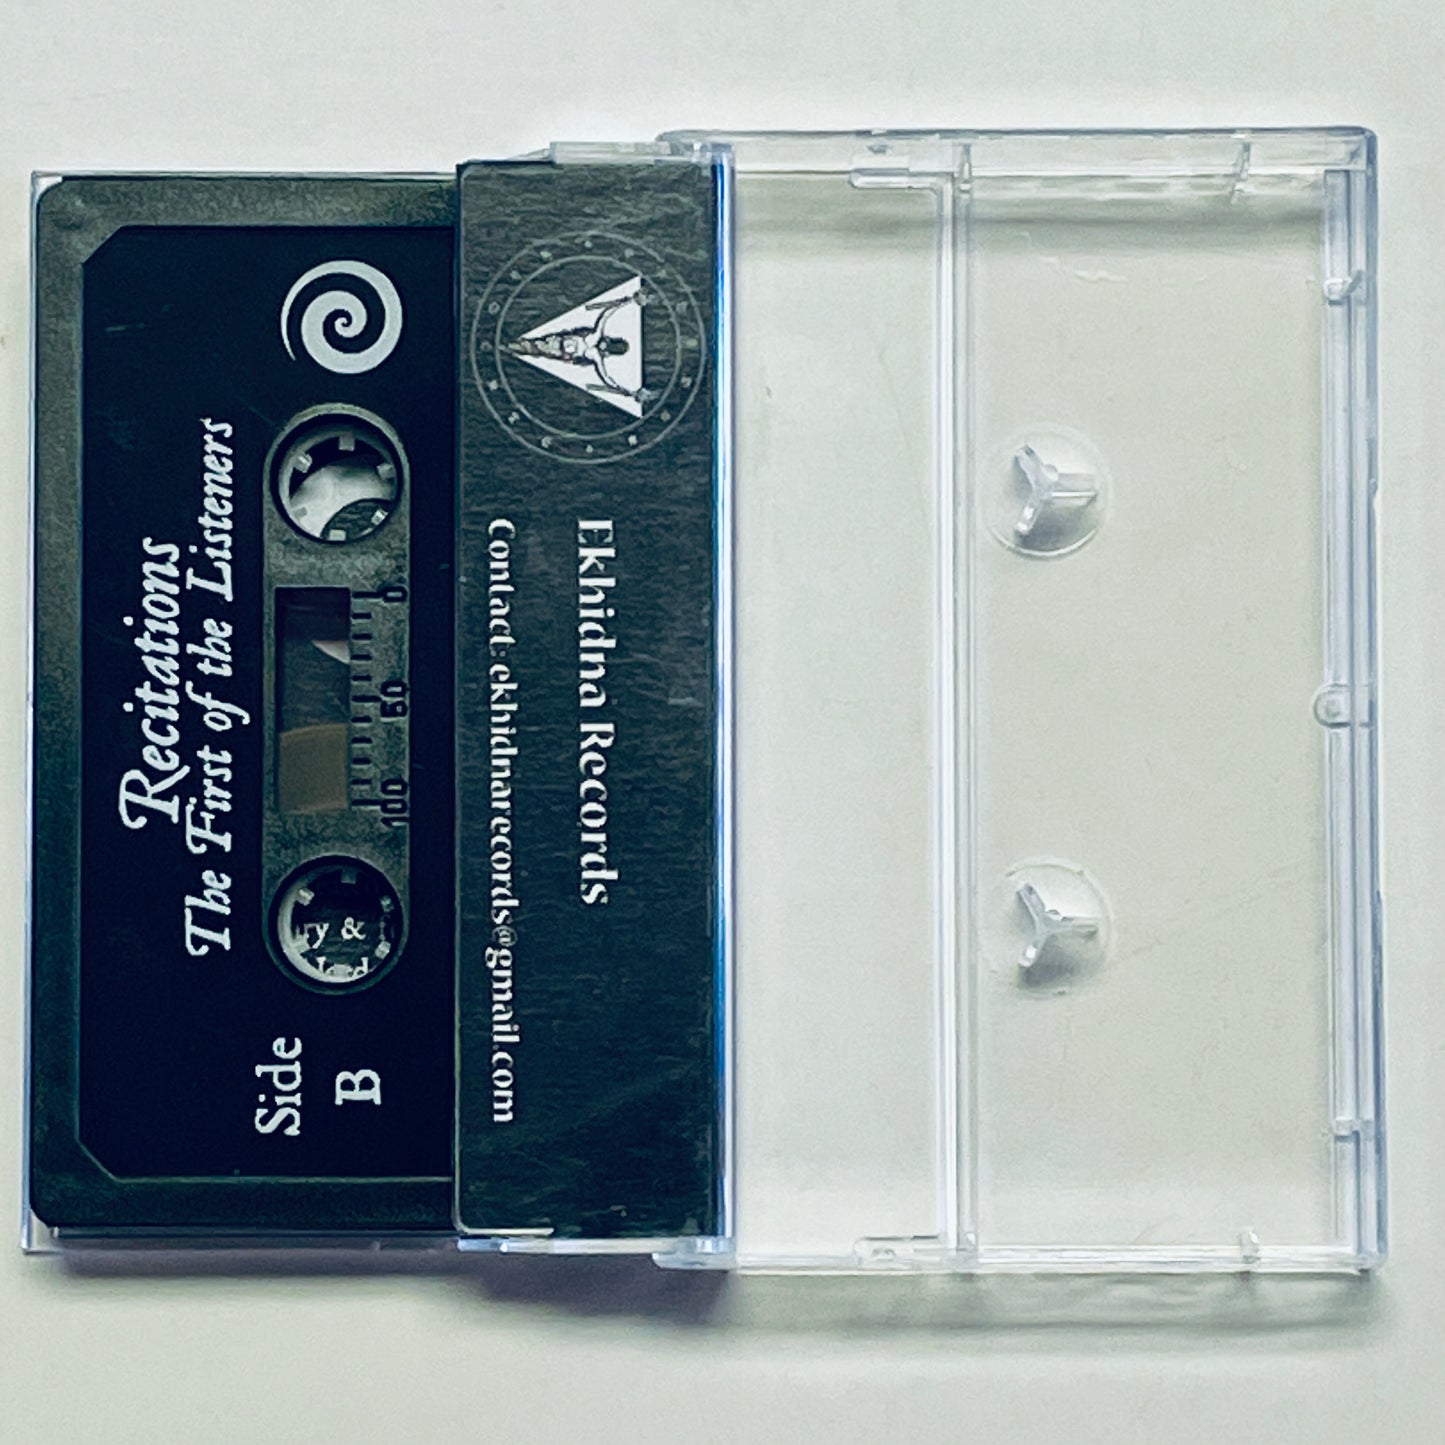 Recitations – The First Of The Listeners cassette tape (used)